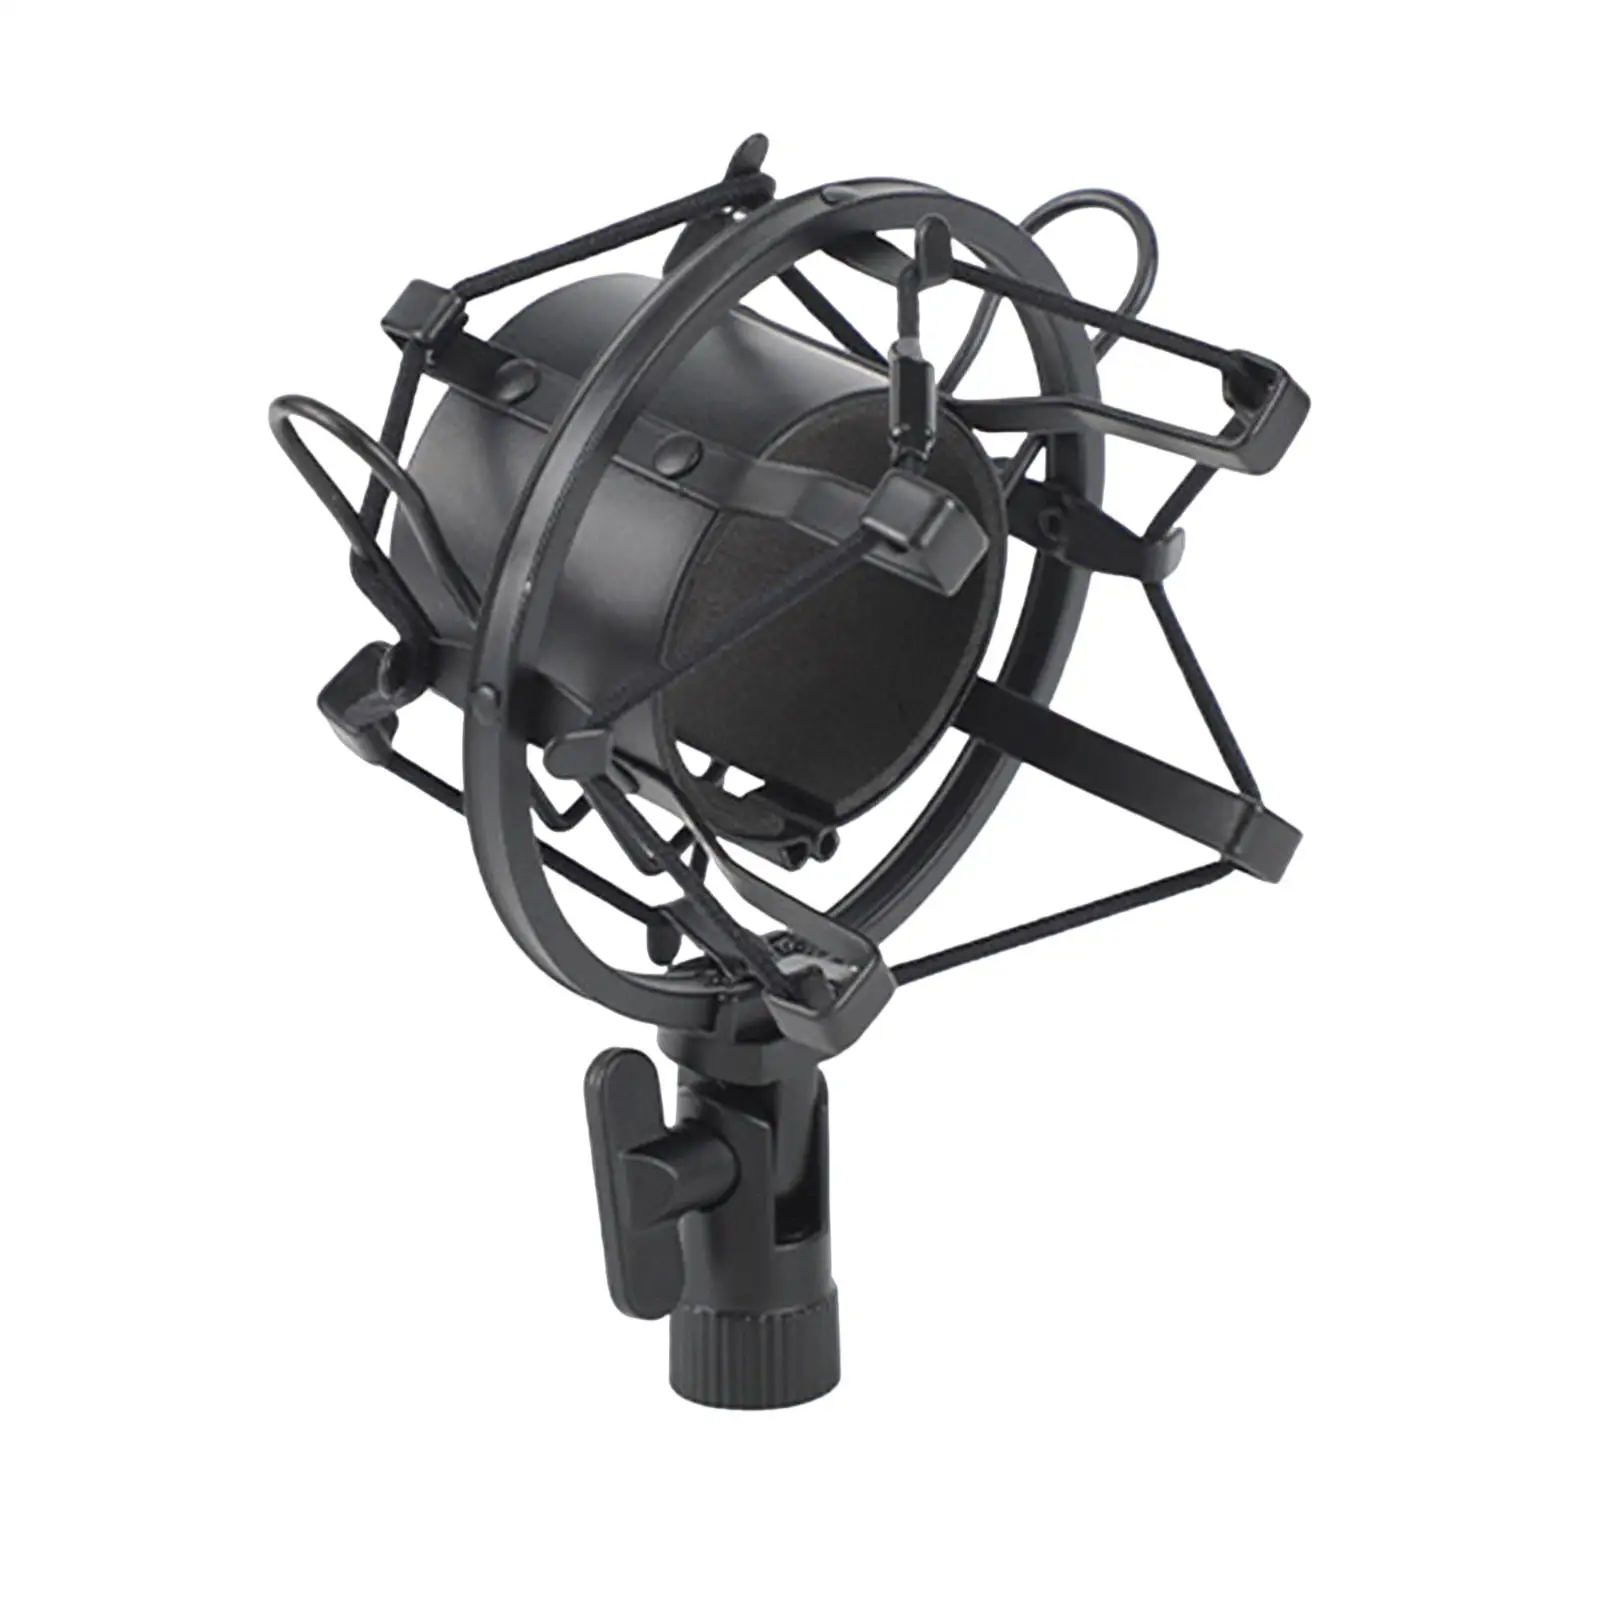 Portable Condenser Microphone Shock Mount Mic Holder Anti Vibration Lightweight for Recording Broadcasting Chat Room